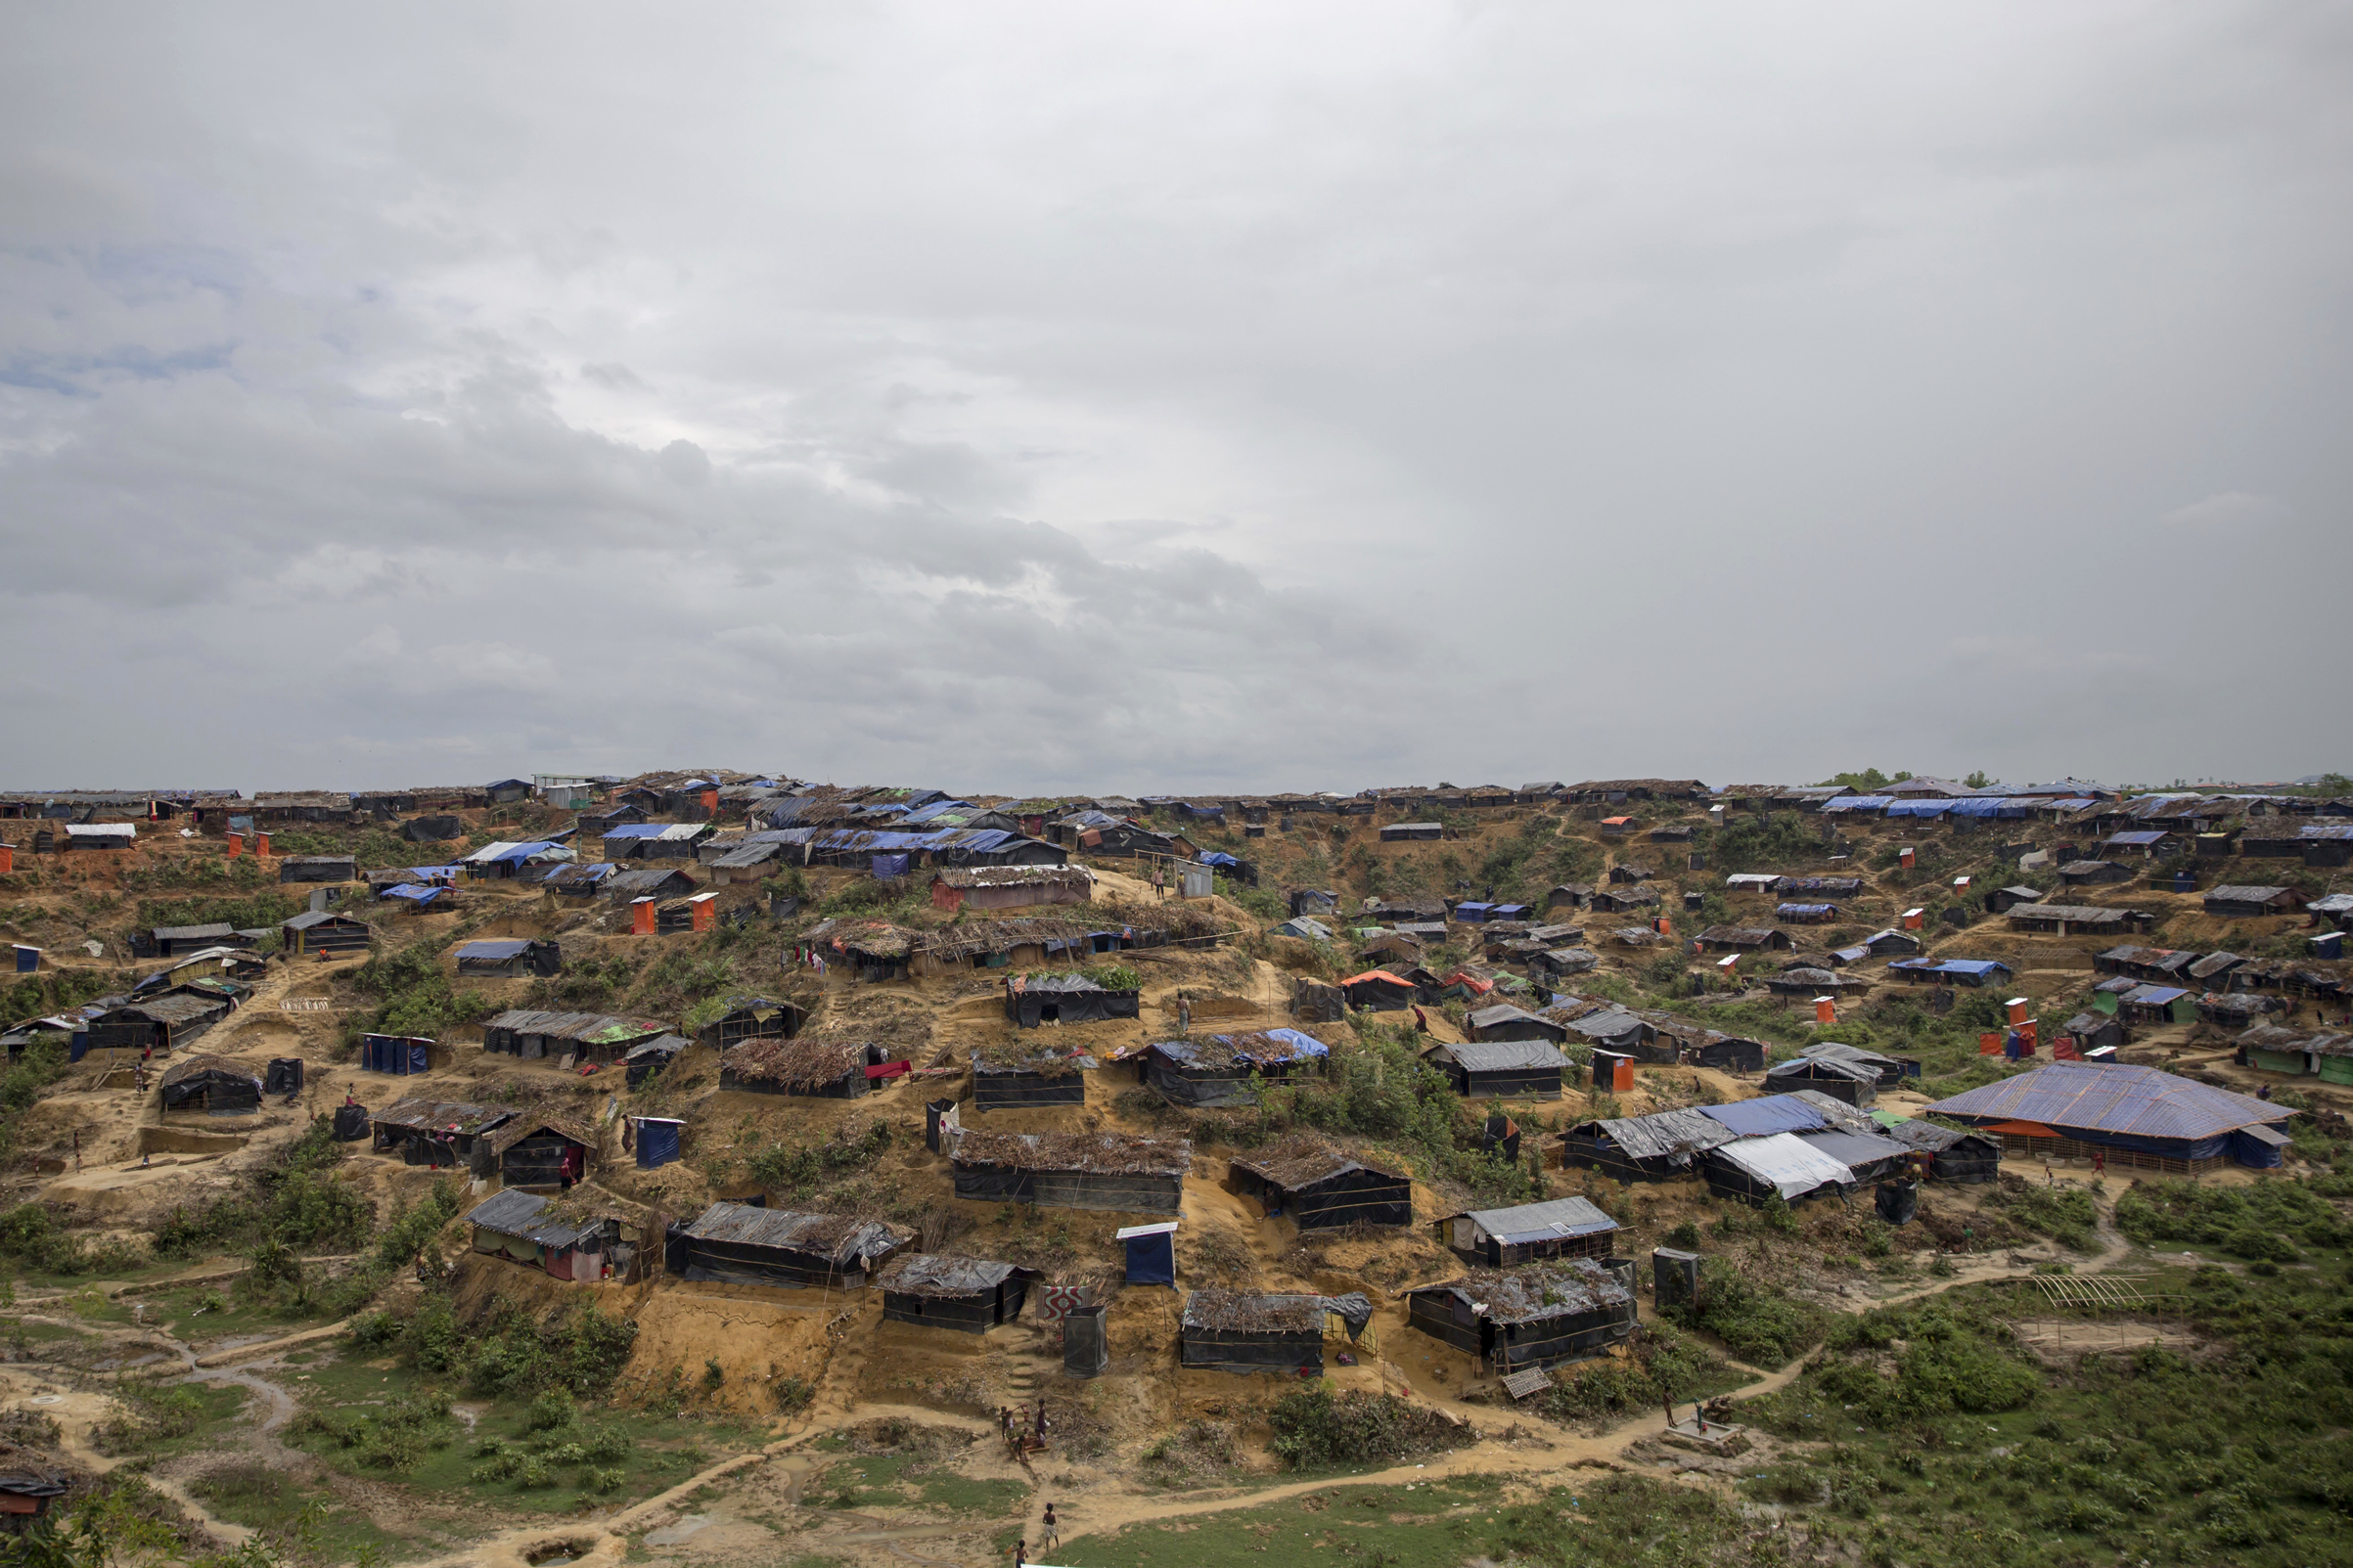 A newly established refugee camp for Rohingya Muslims in Thaingkhali, Bangladesh, on Oct. 19, 2017. (Dar Yasin—AP/Shutterstock)